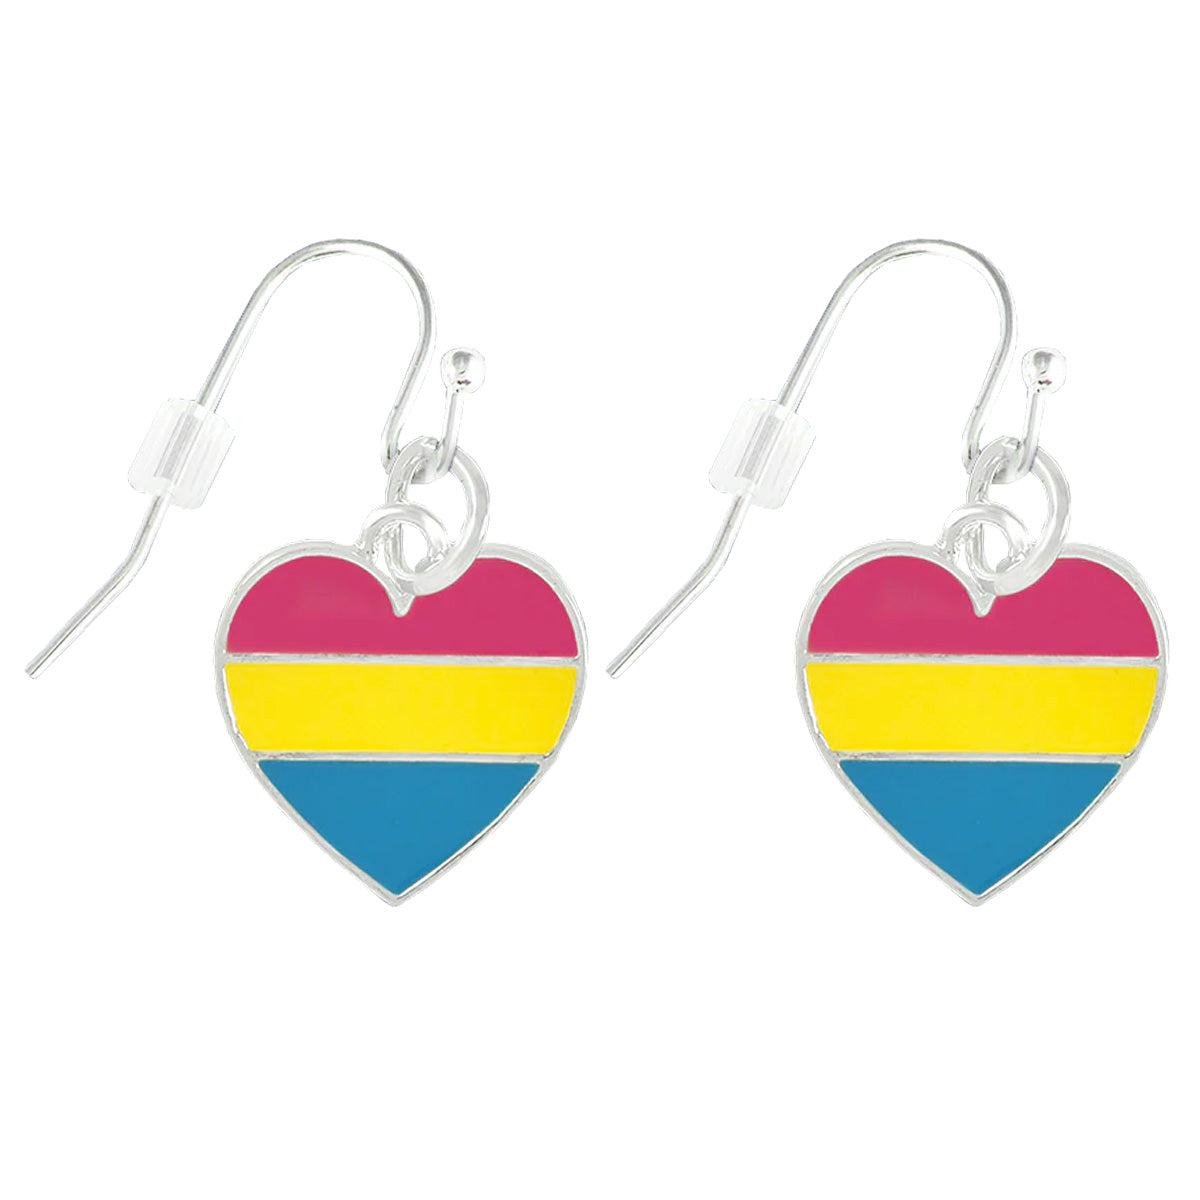 Pansexual Silver Plated Heart Shaped Earrings